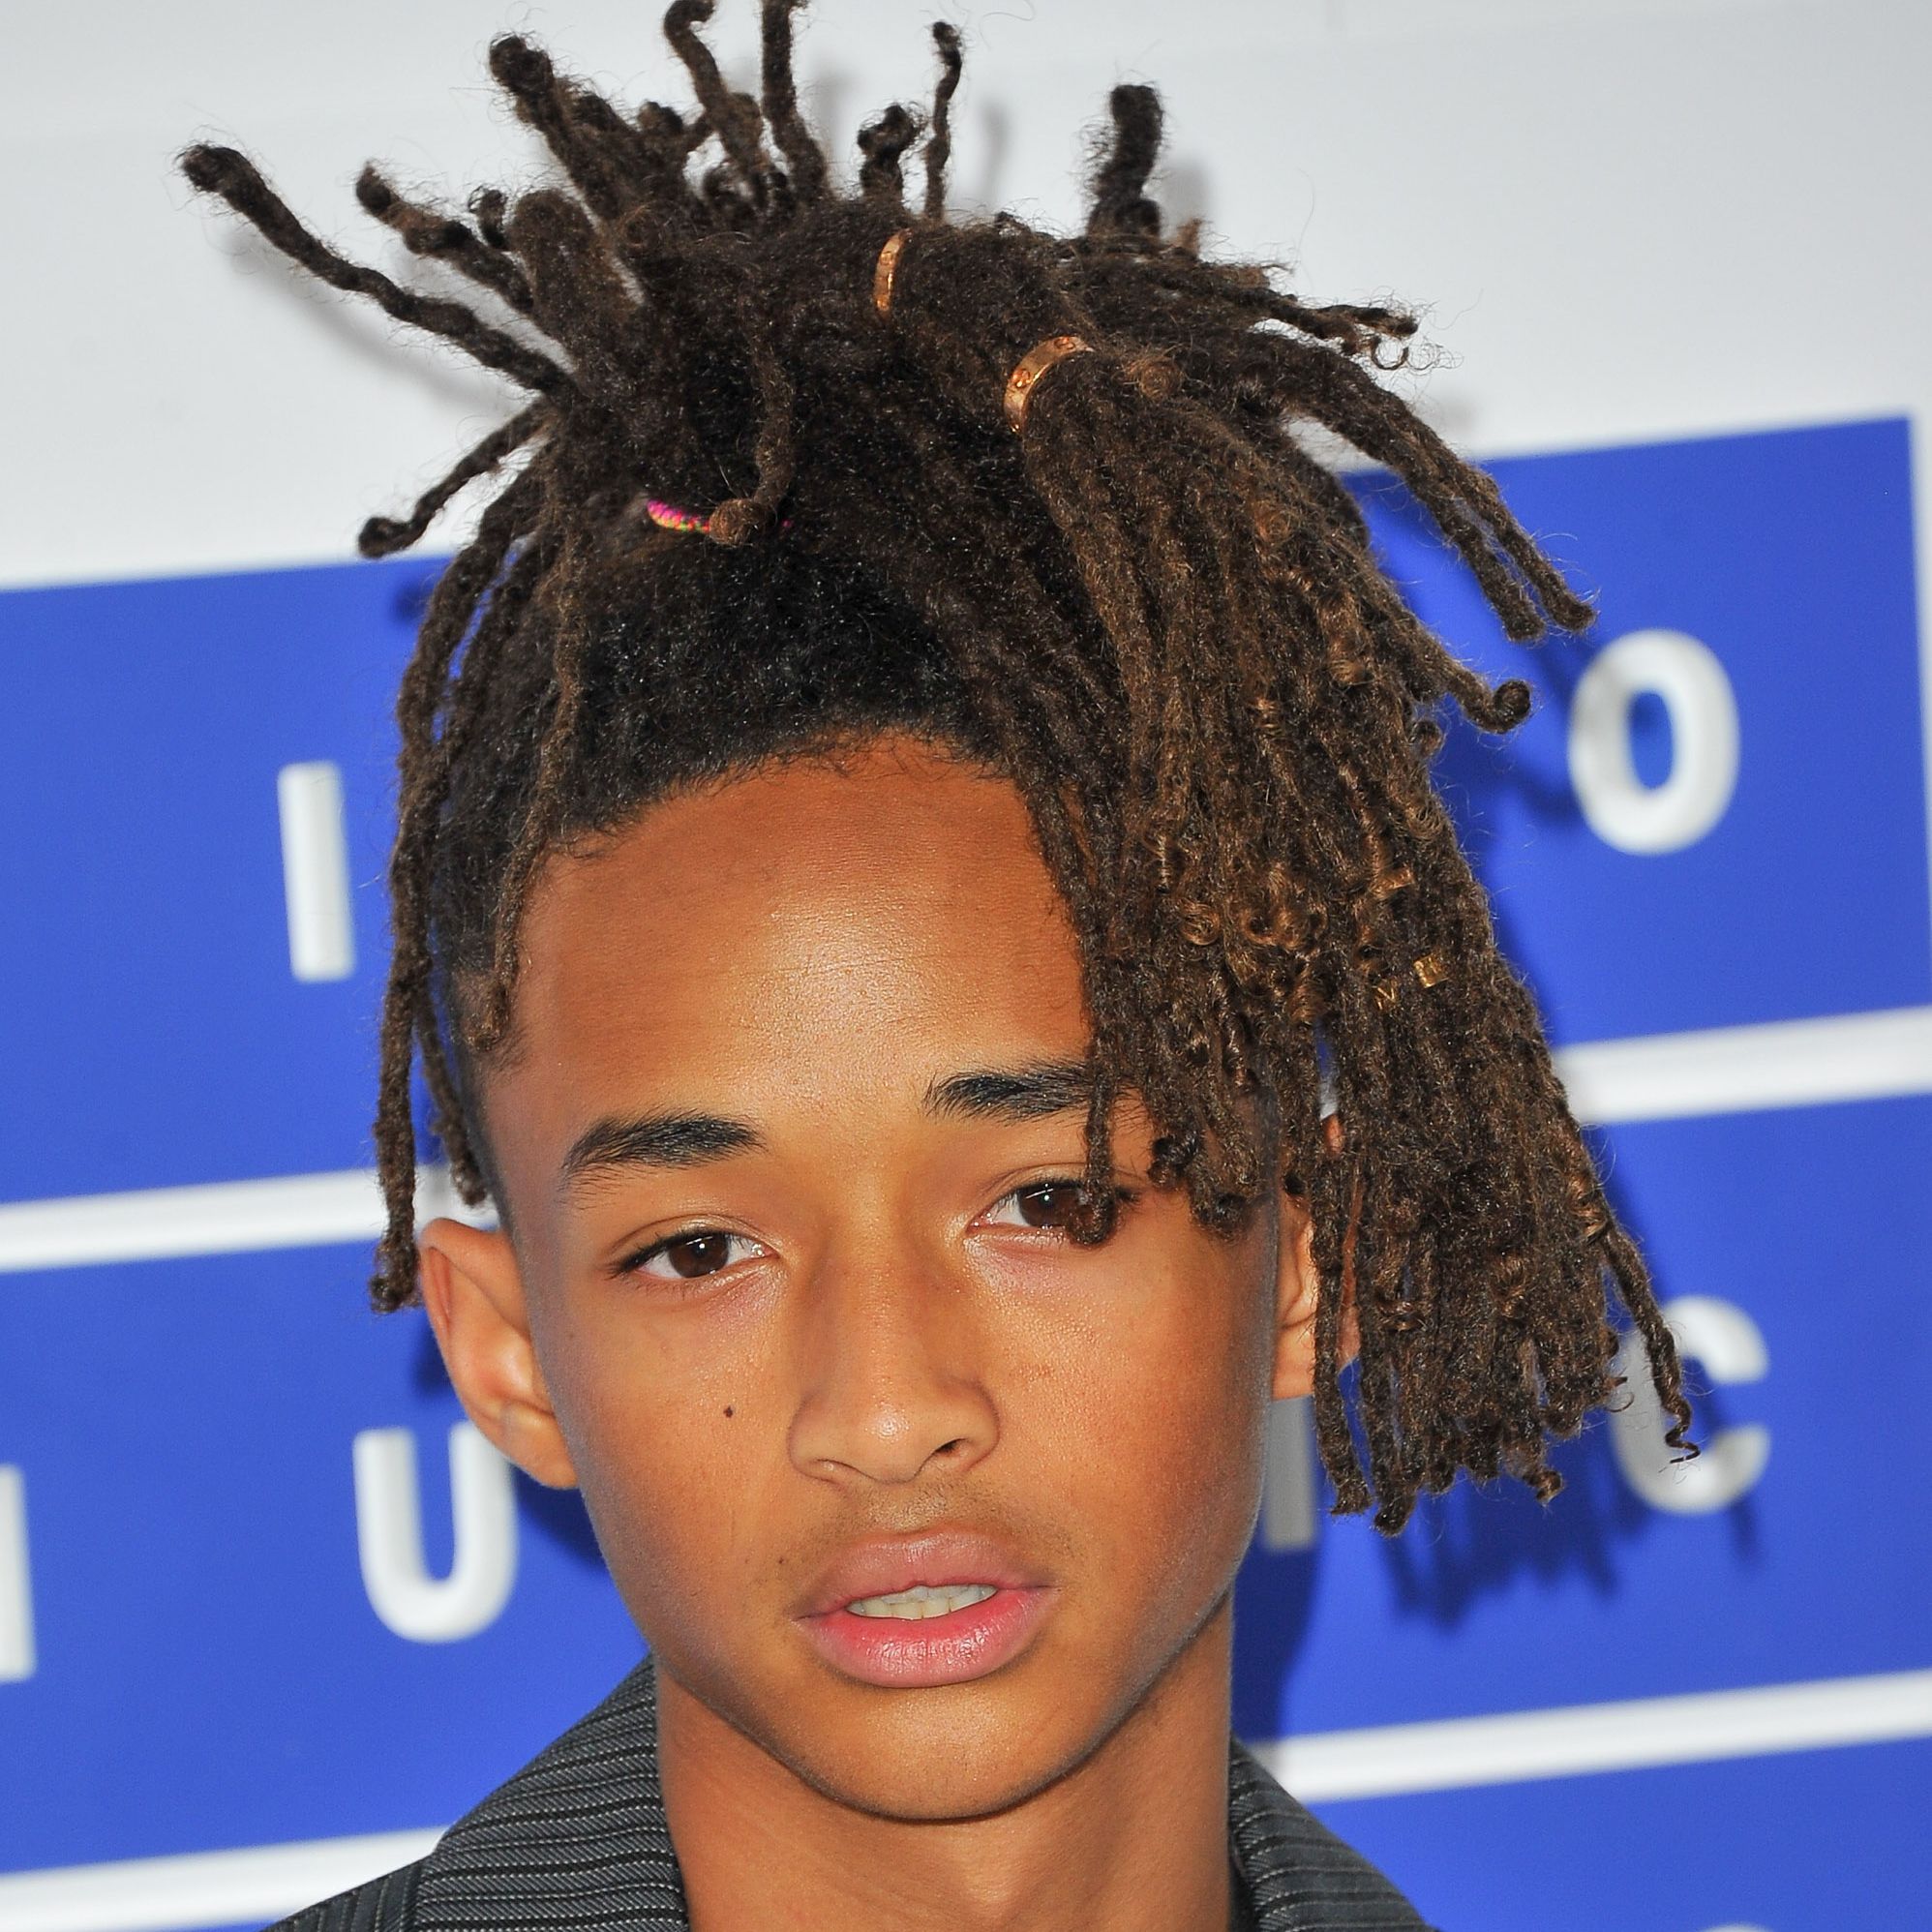 Jaden Smith: From Child Star To 24 Years Old